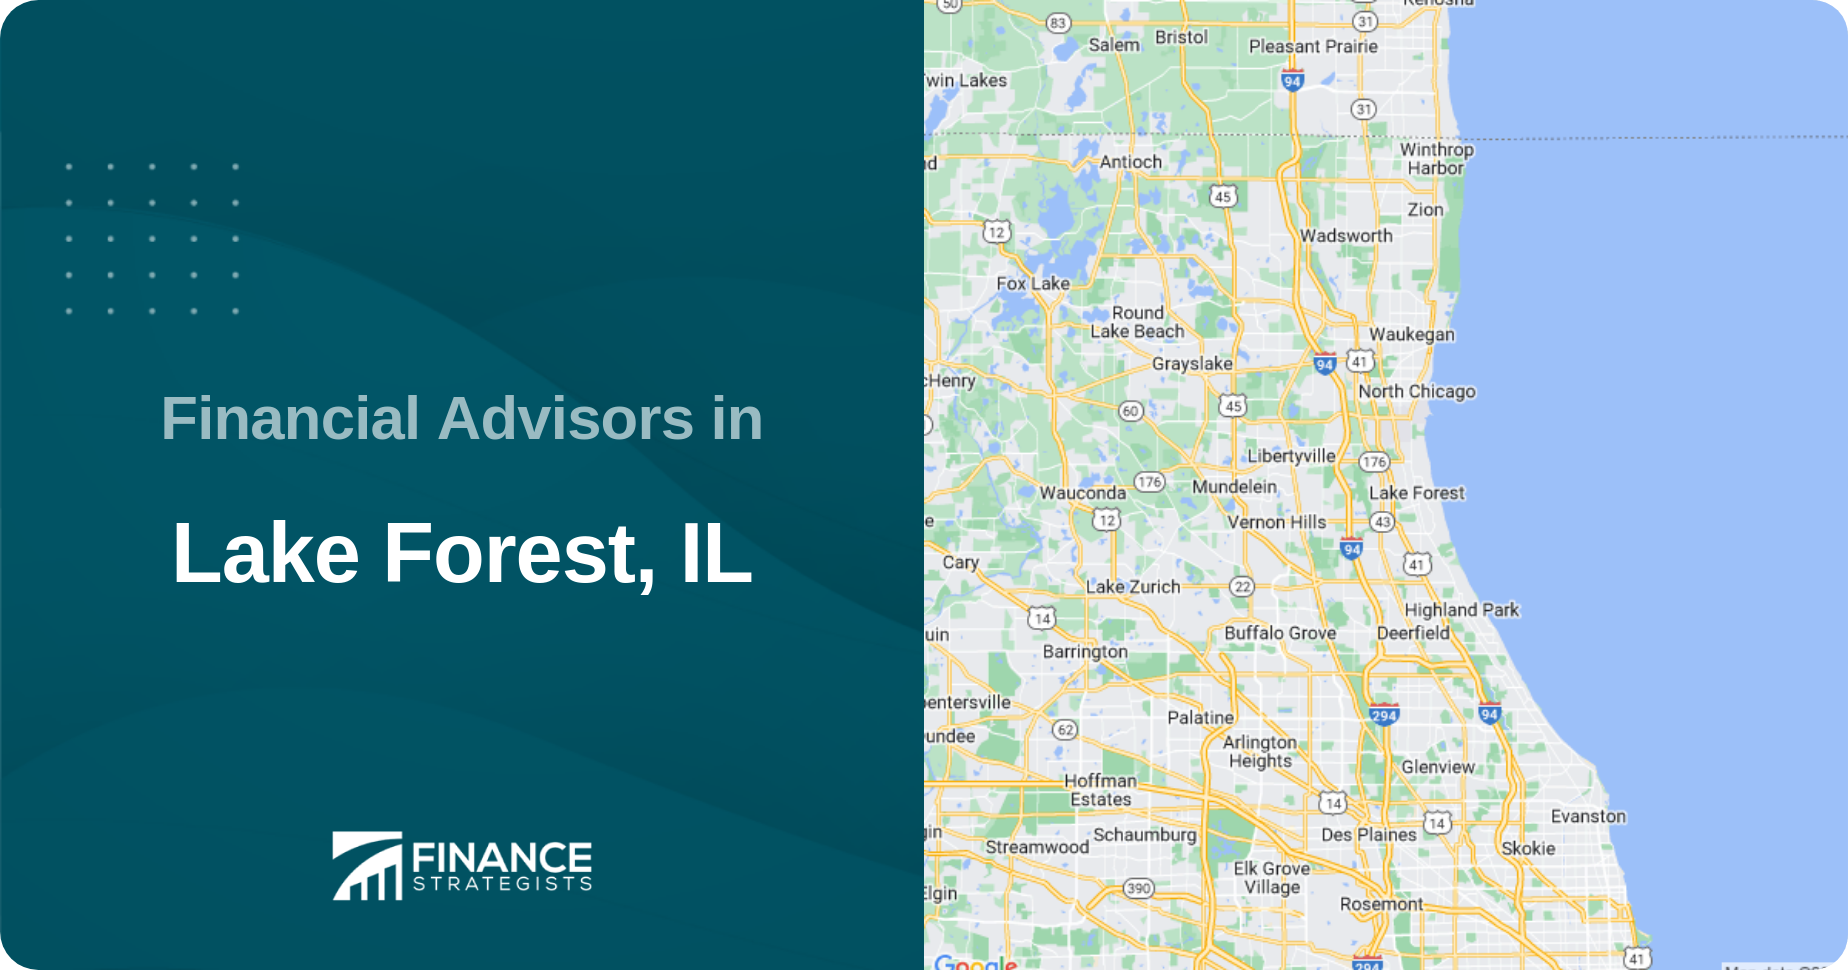 Financial Advisors in Lake Forest, IL